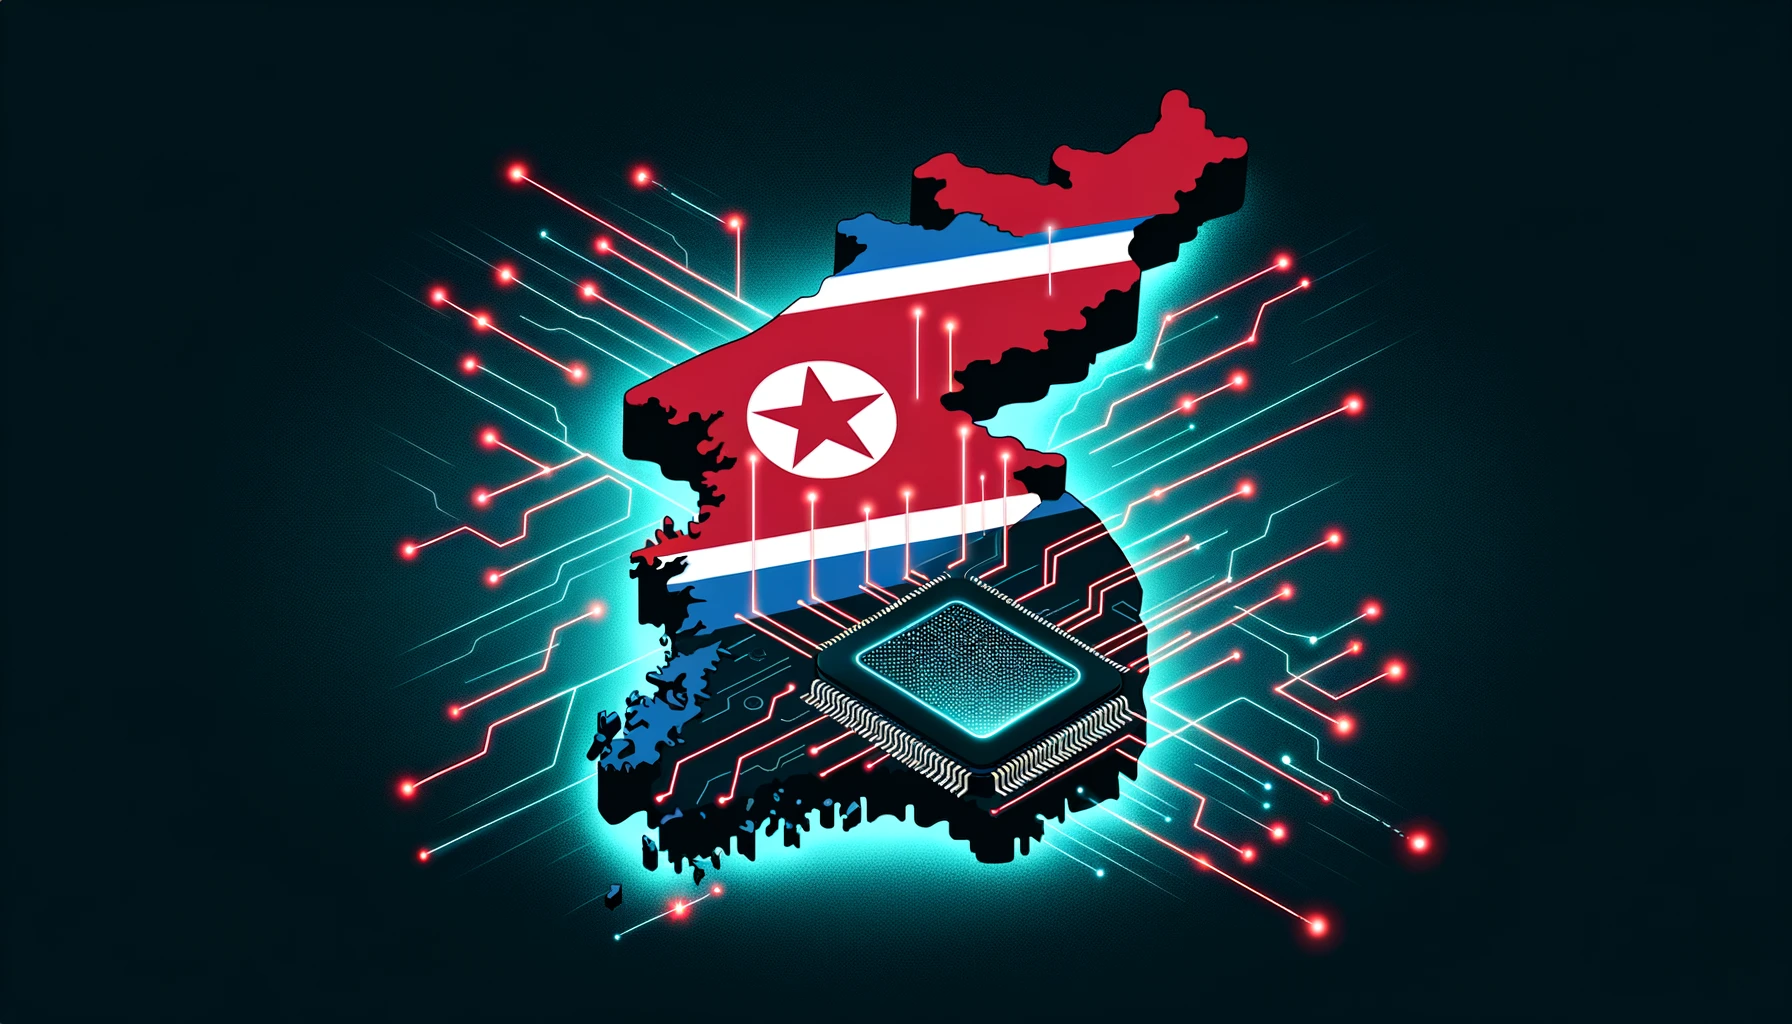 North Korea launches cyberattacks against South Korean semiconductor manufacturers